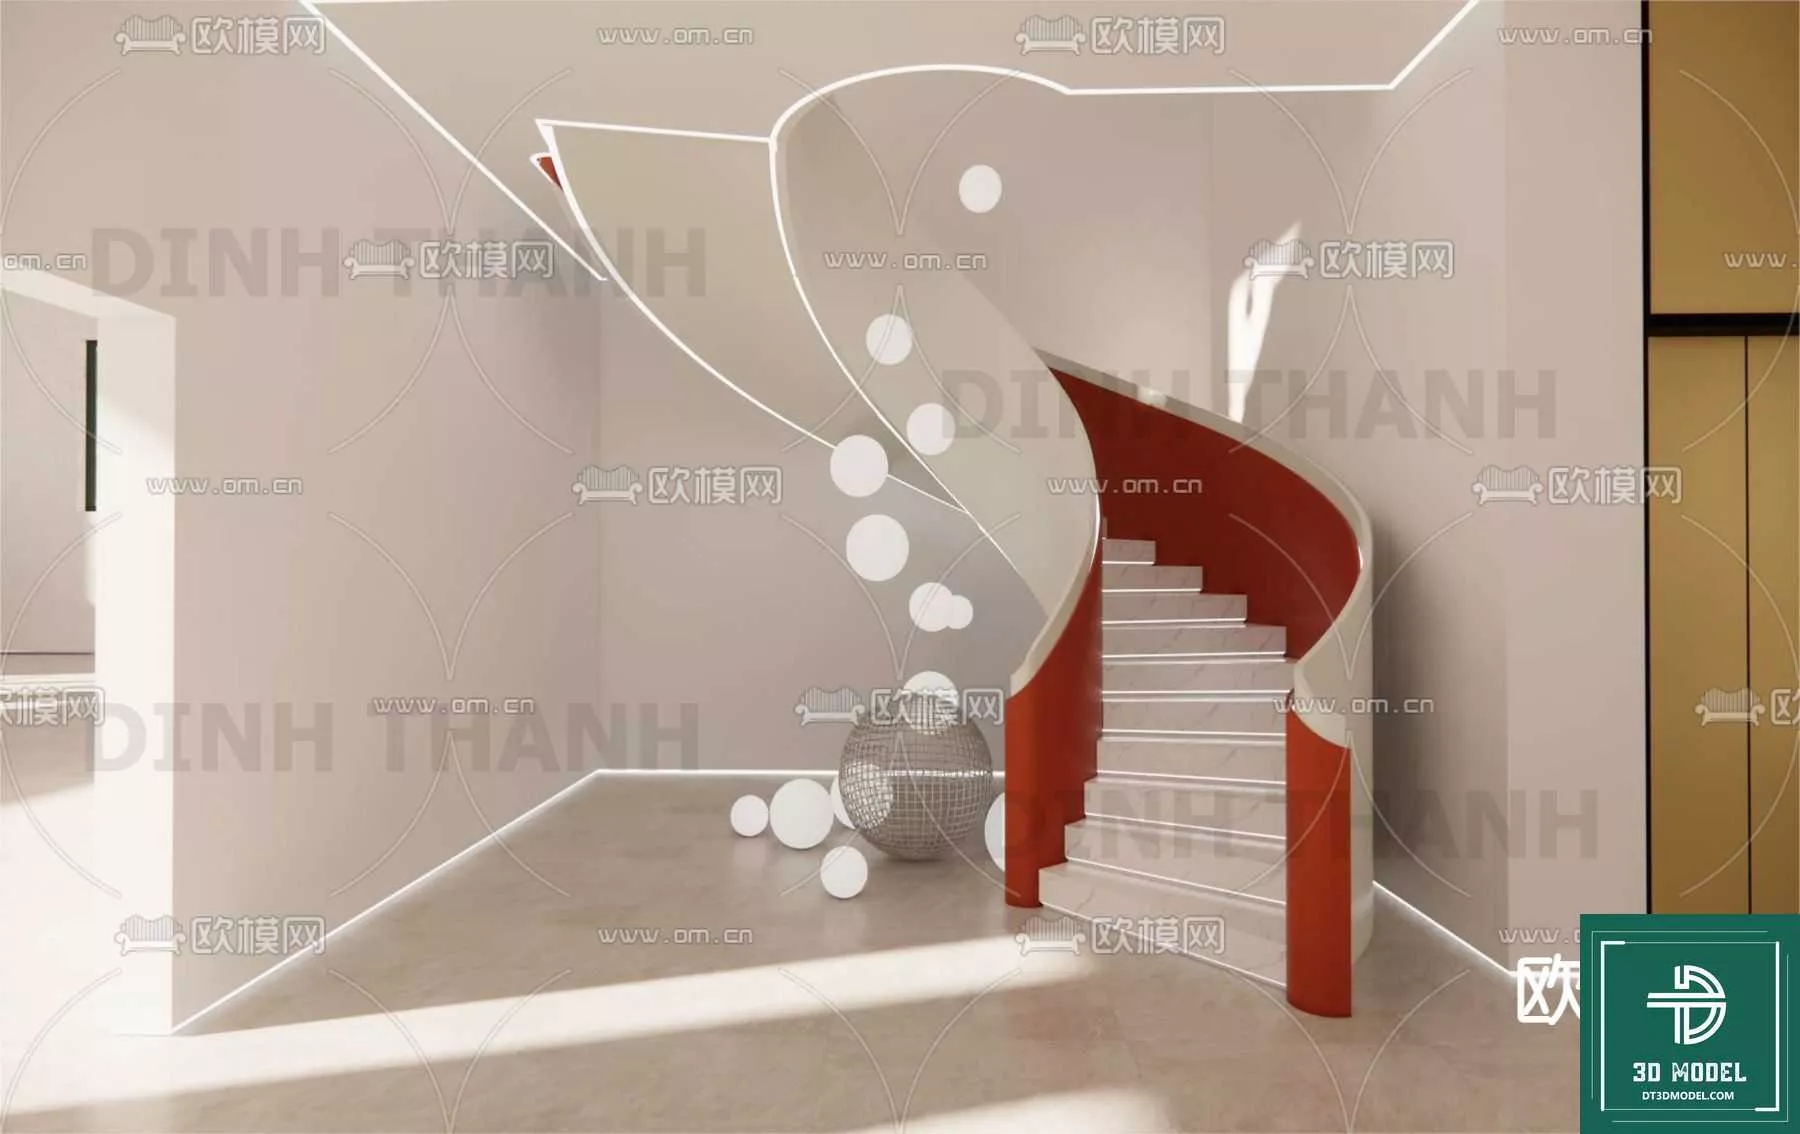 MODERN STAIR - SKETCHUP 3D MODEL - VRAY OR ENSCAPE - ID14257